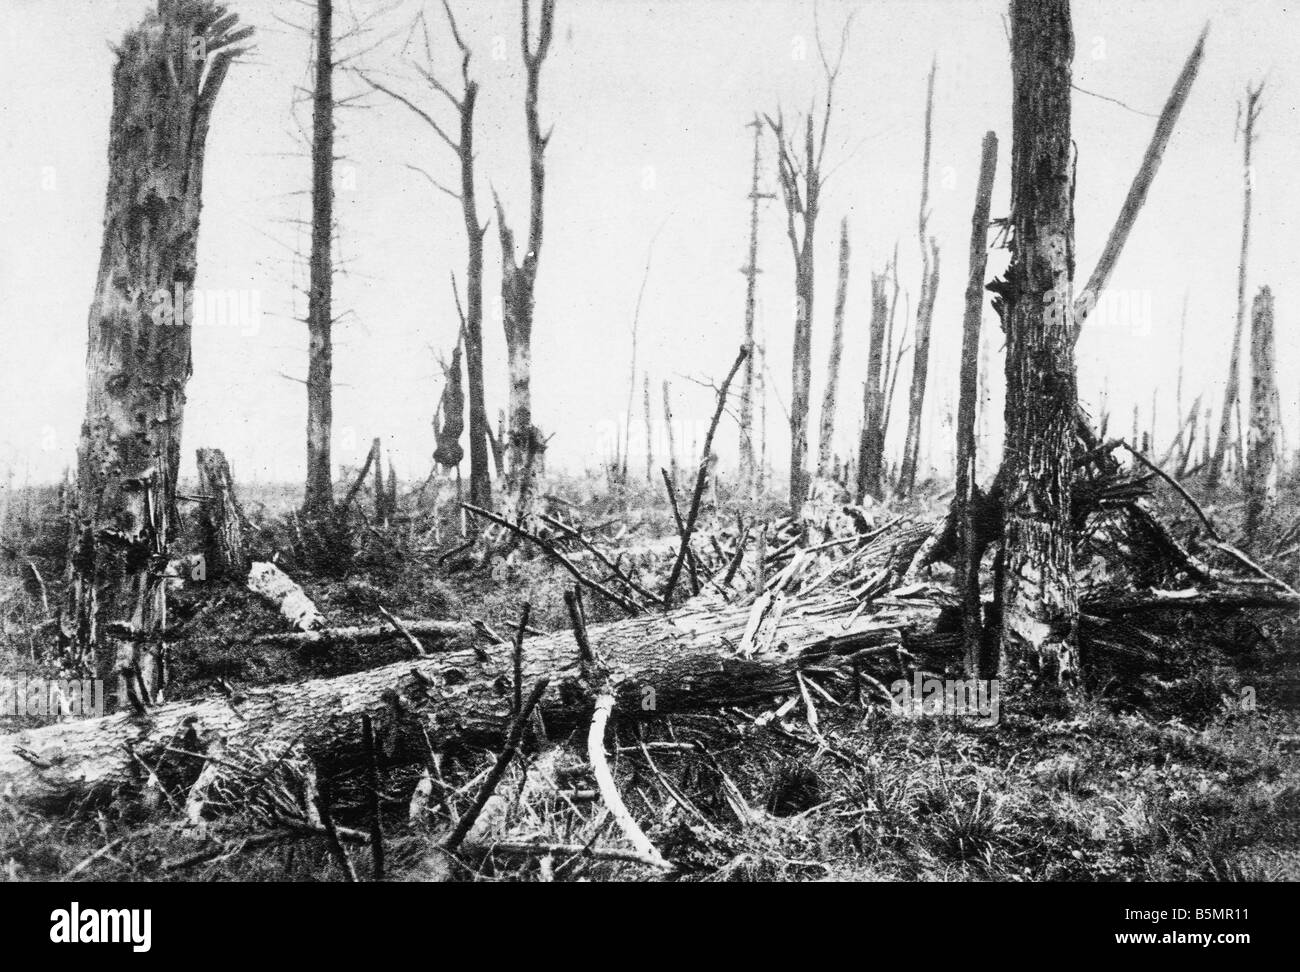 9 1916 6 23 A1 E Chaulnes Wood 1916 World War 1 1914 18 Western Front Battle of the Somme 23rd June to 26th November 1916 Remain Stock Photo